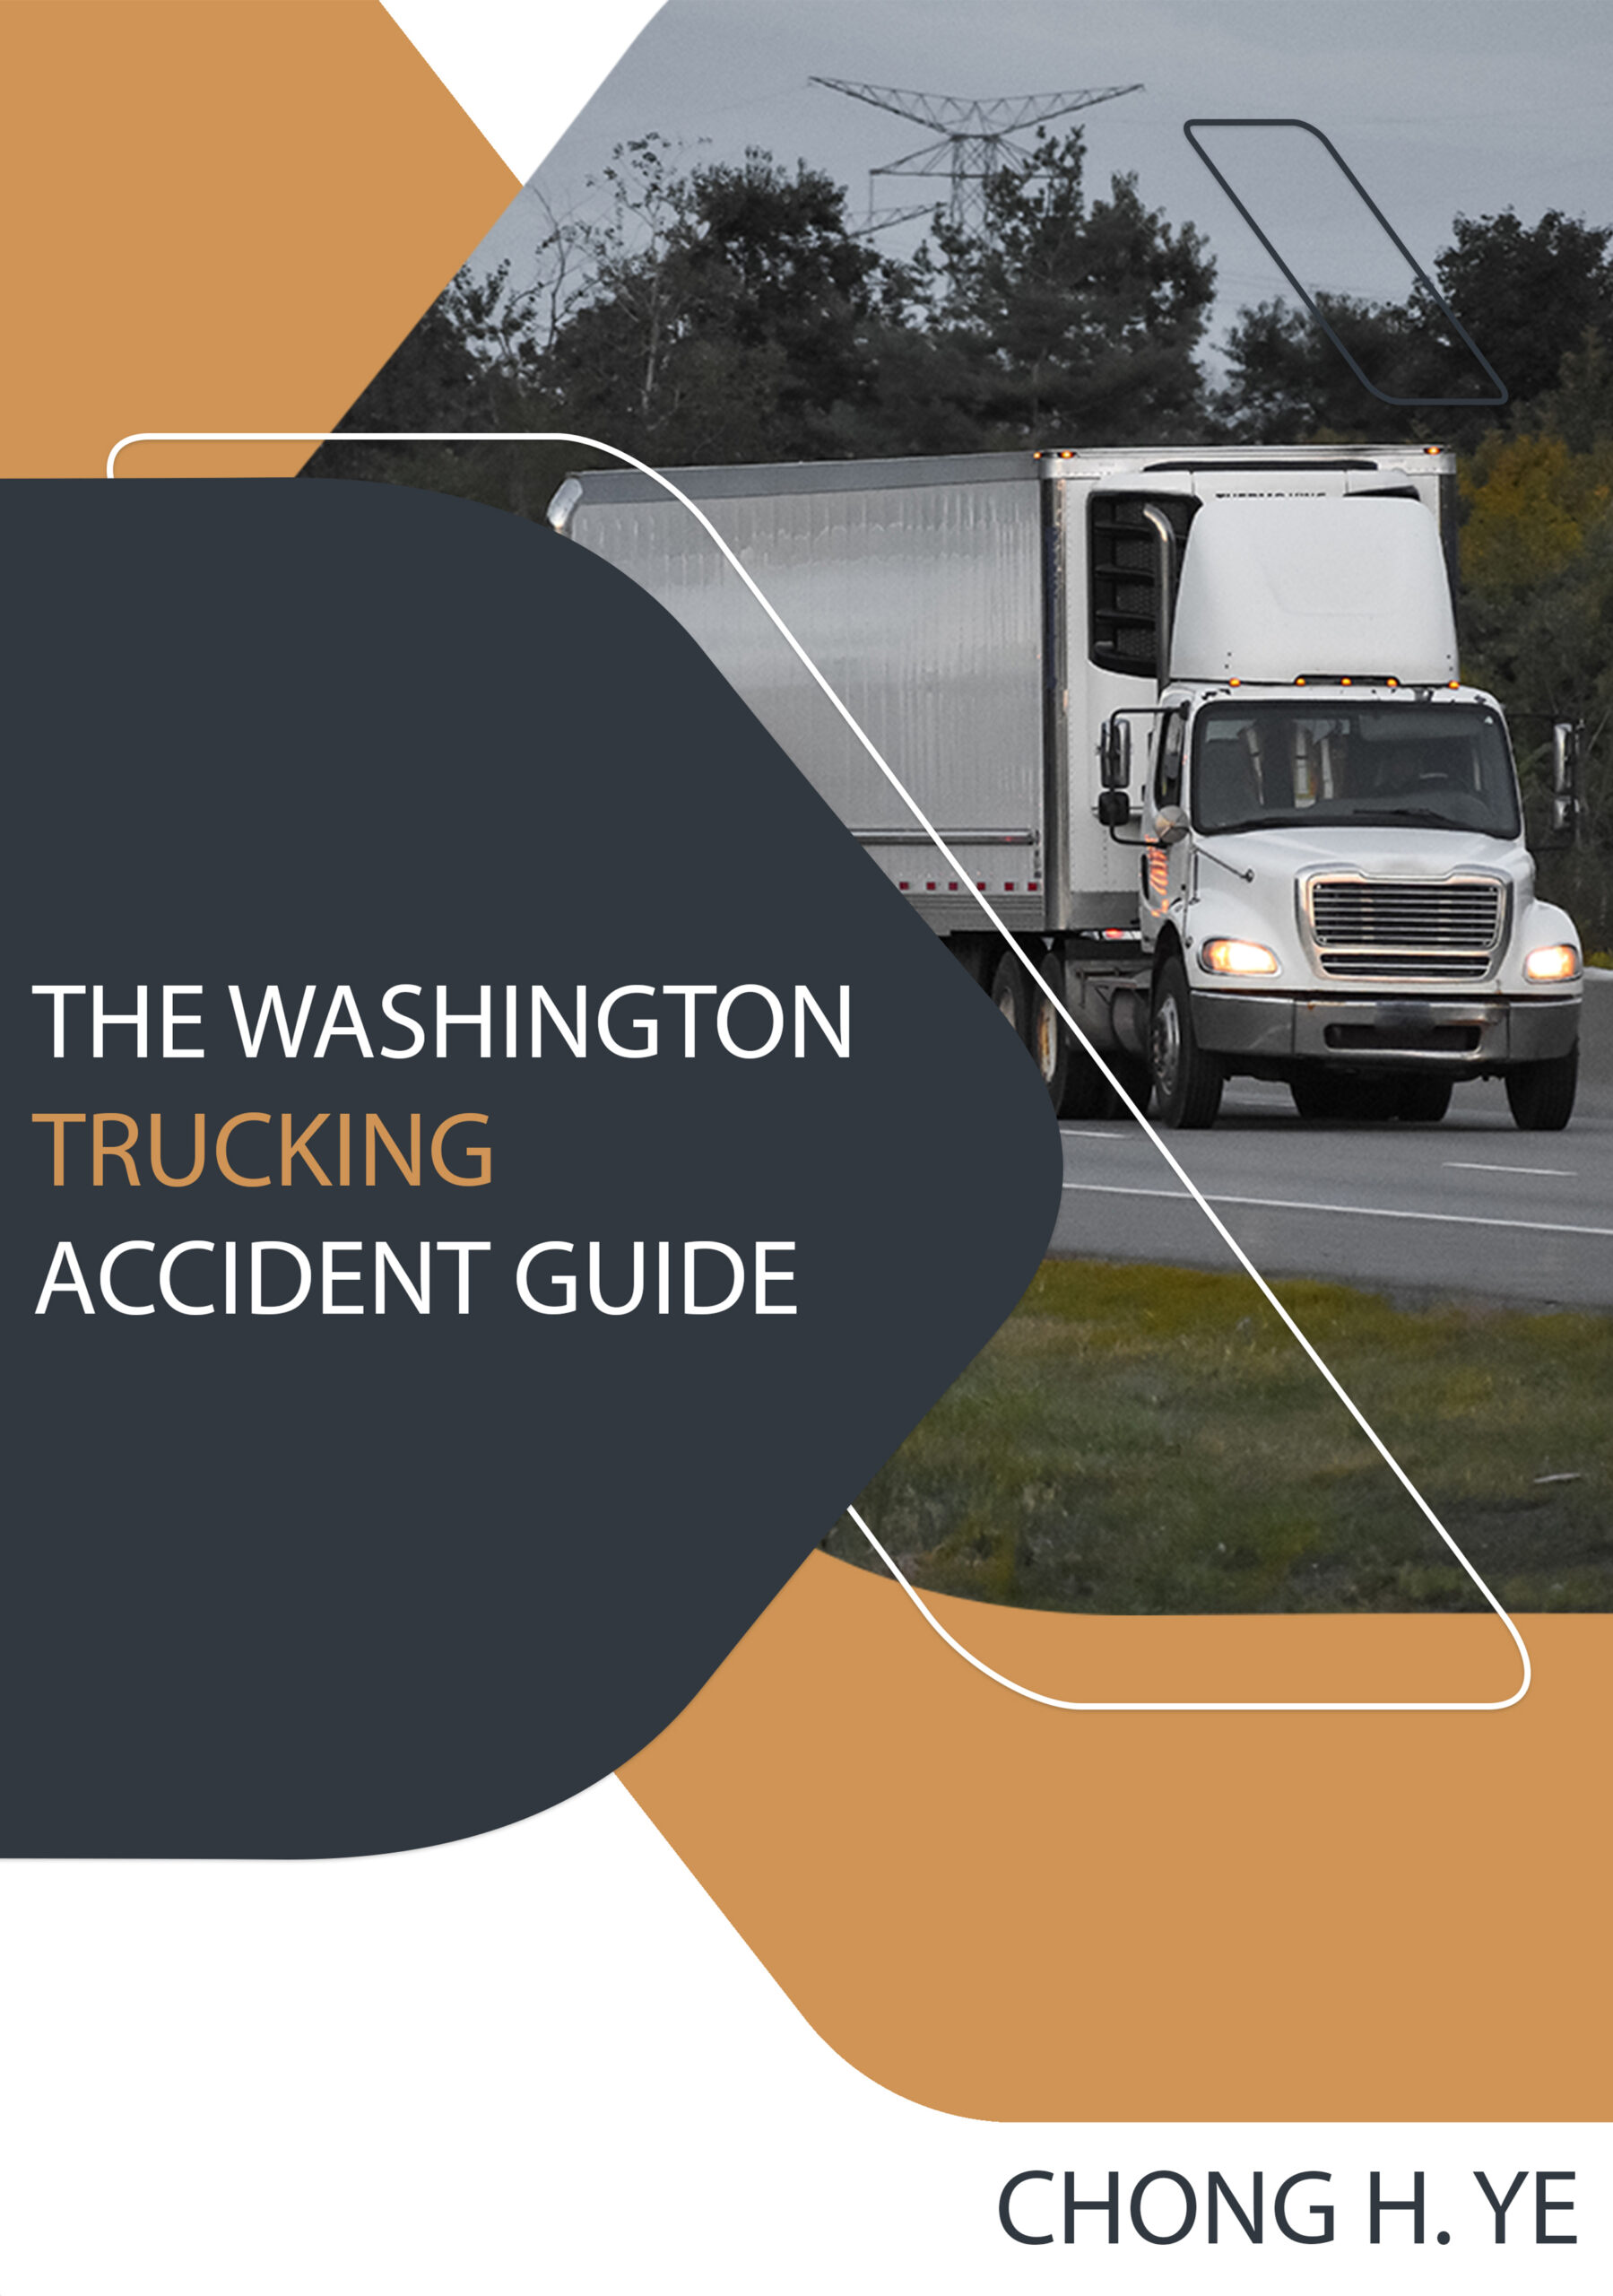 The Washington State Trucking Accident Guide